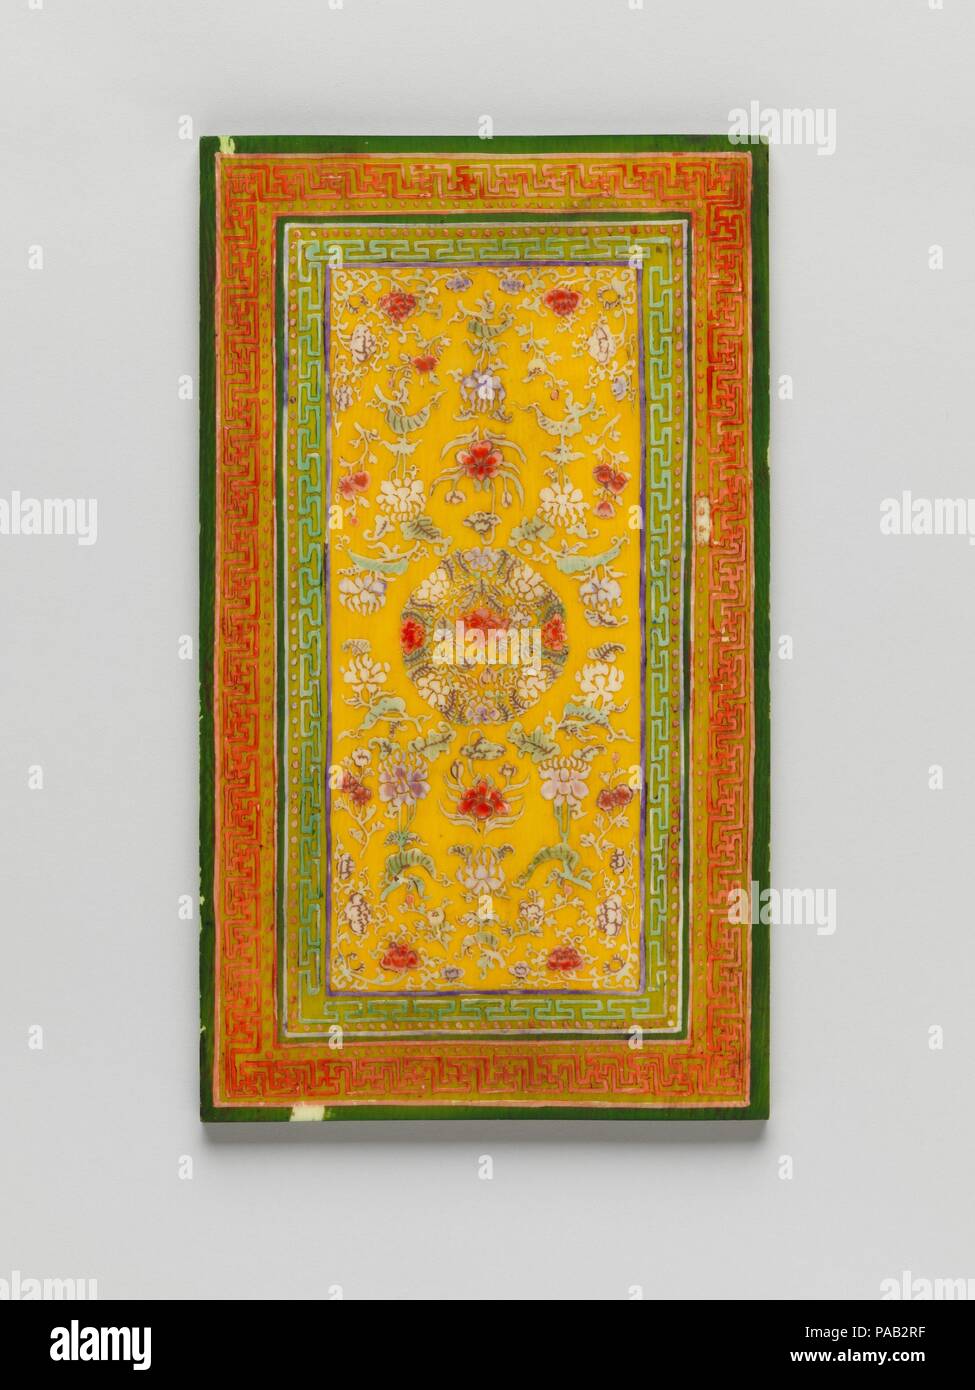 Tablet with Design for a Carpet. Culture: China. Dimensions: 3 15/16 x 6 5/8 in. (10 x 16.8 cm).  The use of a precious material such as ivory to make a model of a carpet was typical of the famously extravagant Qianlong Emperor. The design of a roundel filled with flowers and surrounded by floral scrolls can also be found in porcelains and other objects from the eighteenth century. Museum: Metropolitan Museum of Art, New York, USA. Stock Photo